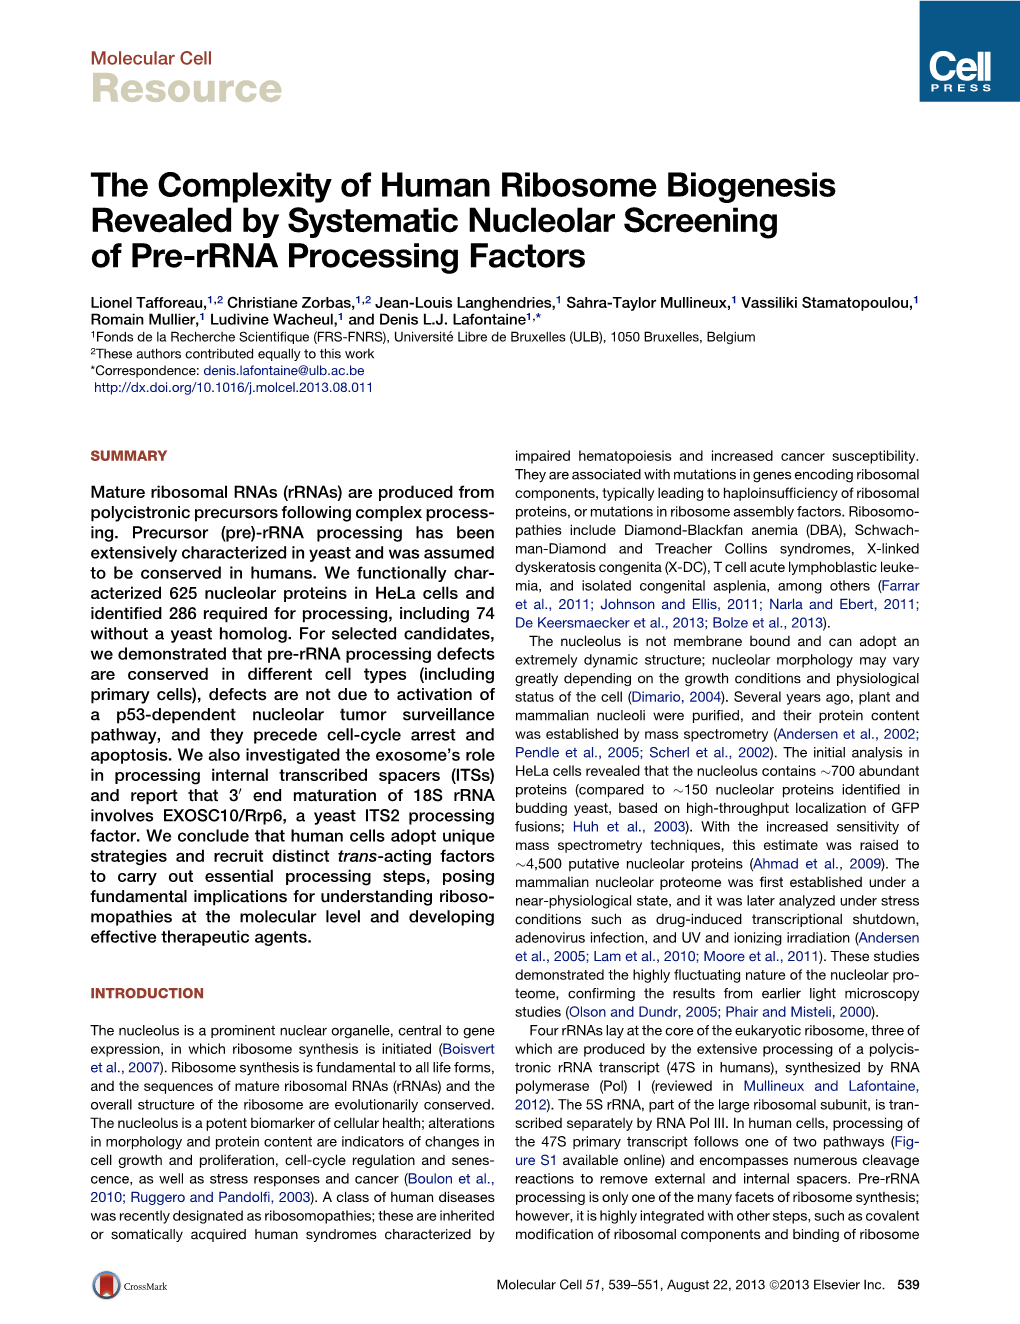 The Complexity of Human Ribosome Biogenesis Revealed by Systematic Nucleolar Screening of Pre-Rrna Processing Factors